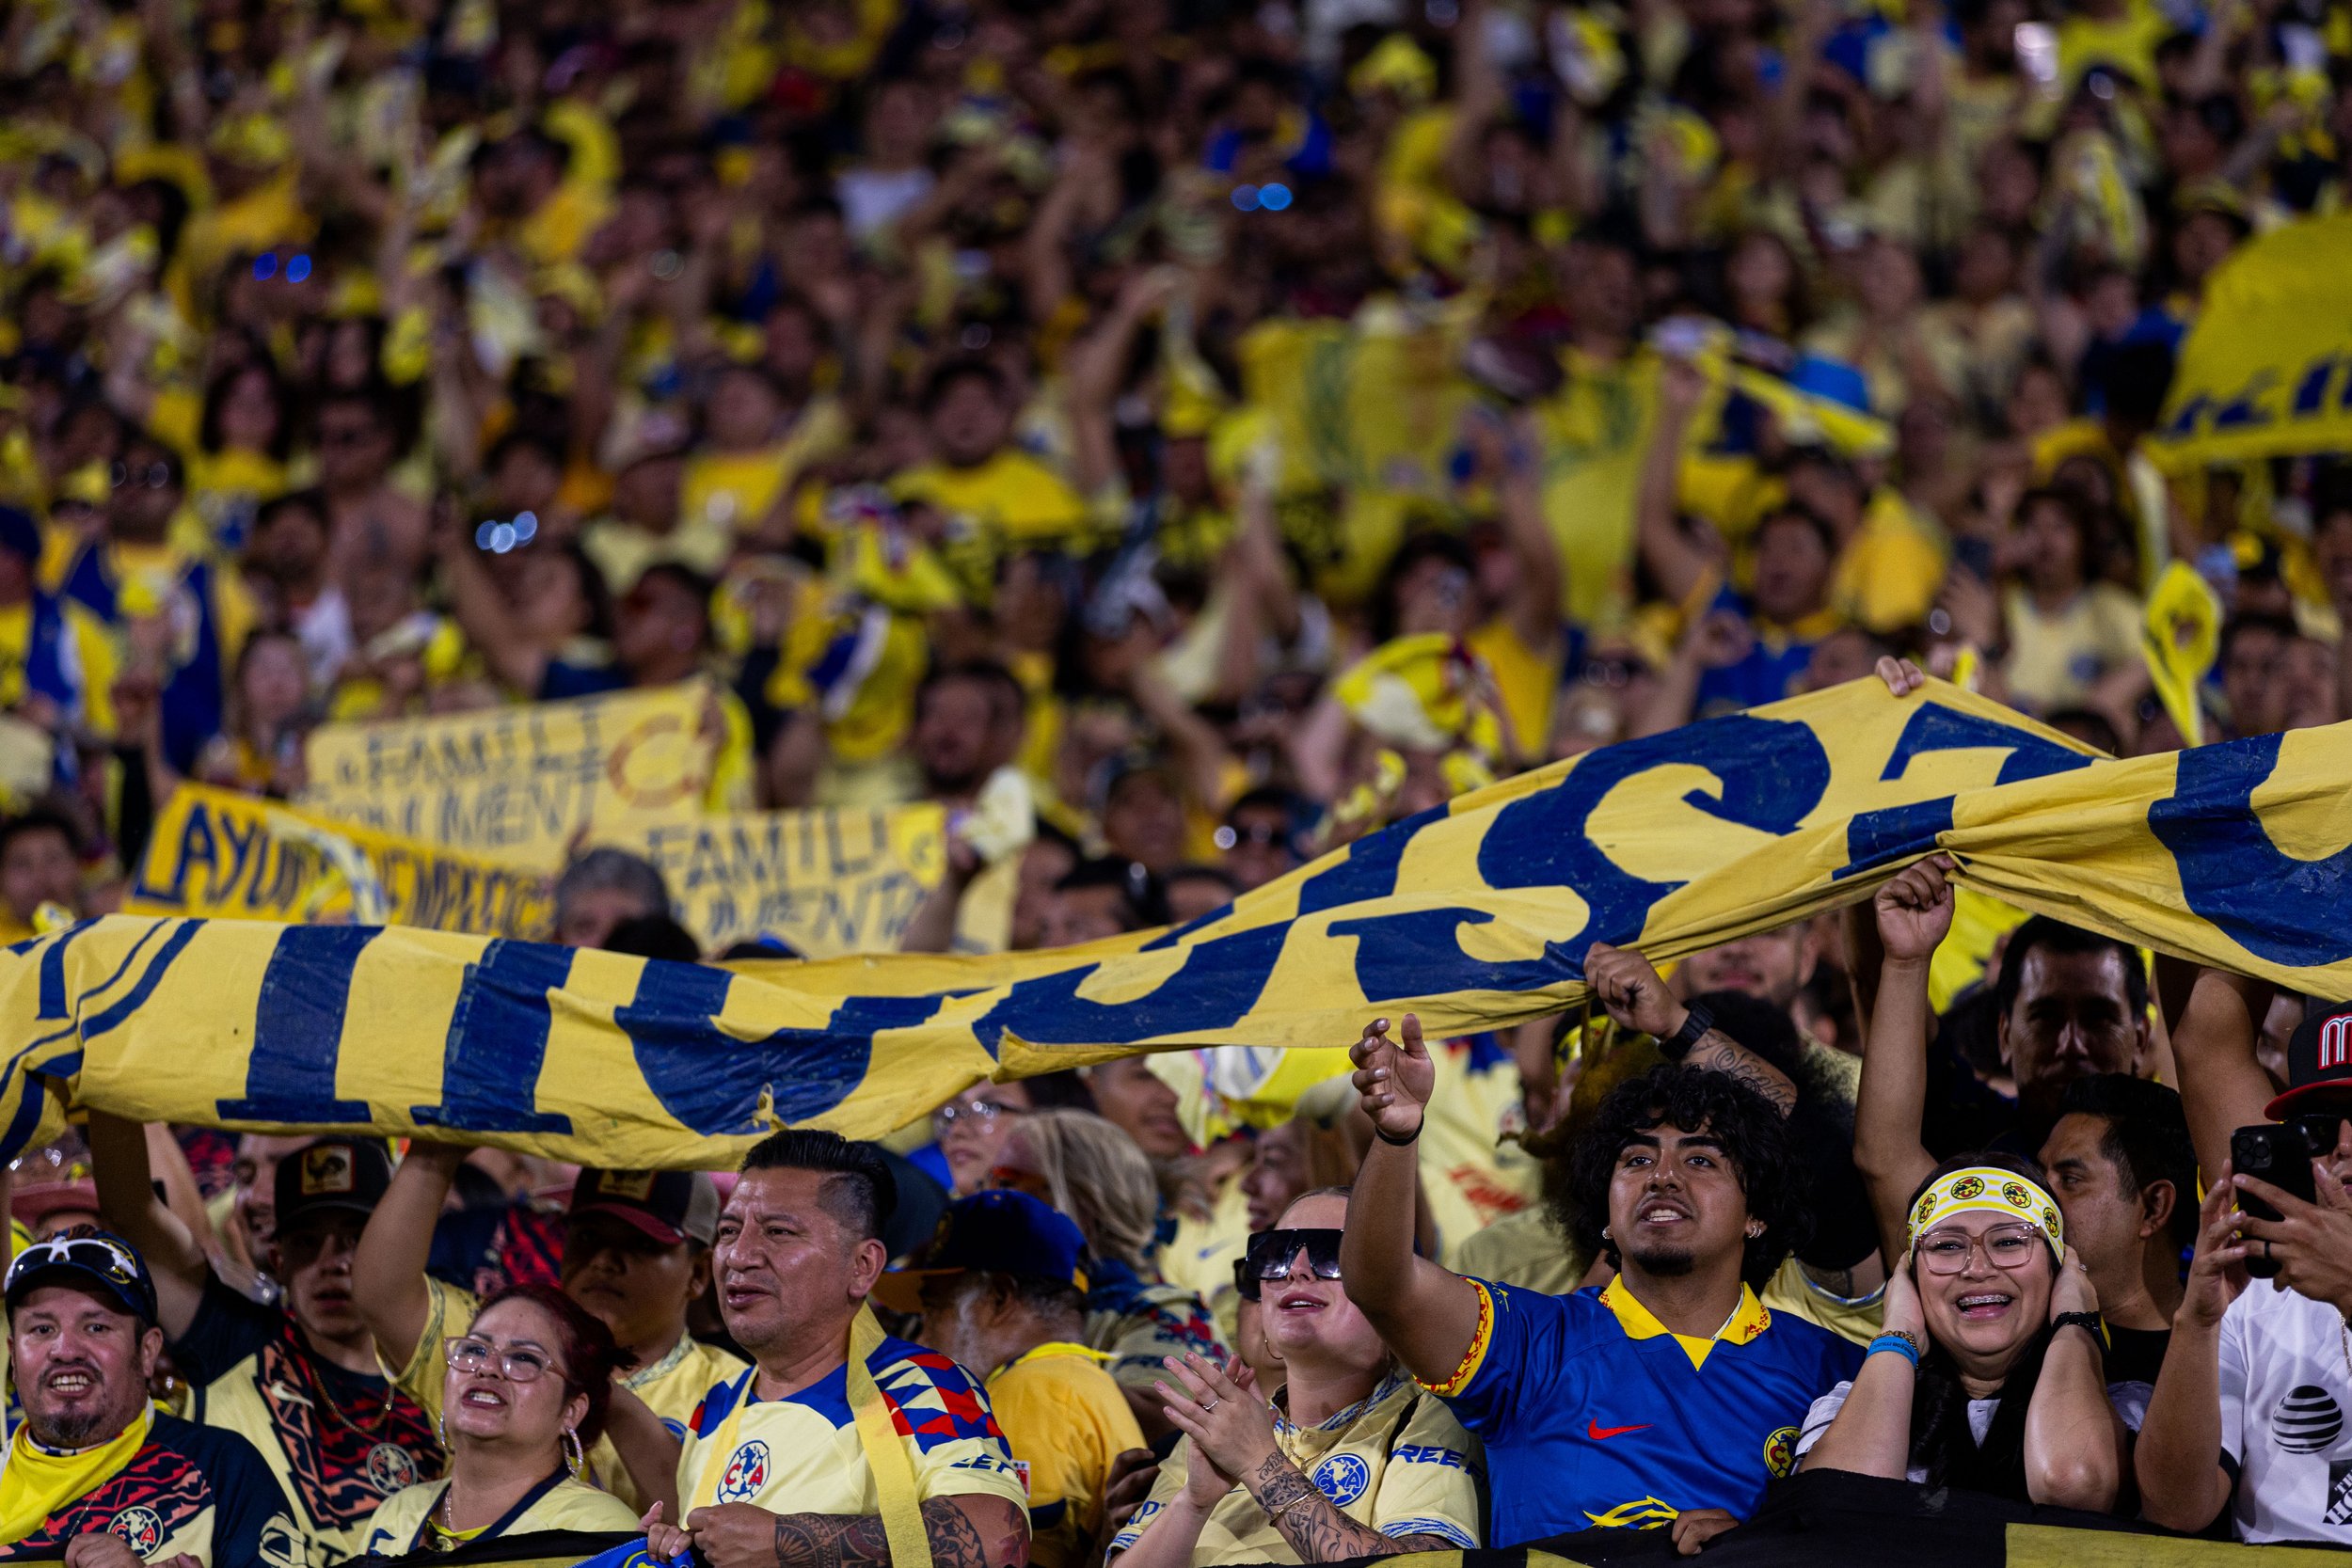  Club America fans cheering for their team during the rivalry match against C.D. Guadalajara at the Rose Bowl in Pasadena, Calif. on Sunday, Oct. 15. (Danilo Perez | The Corair) 